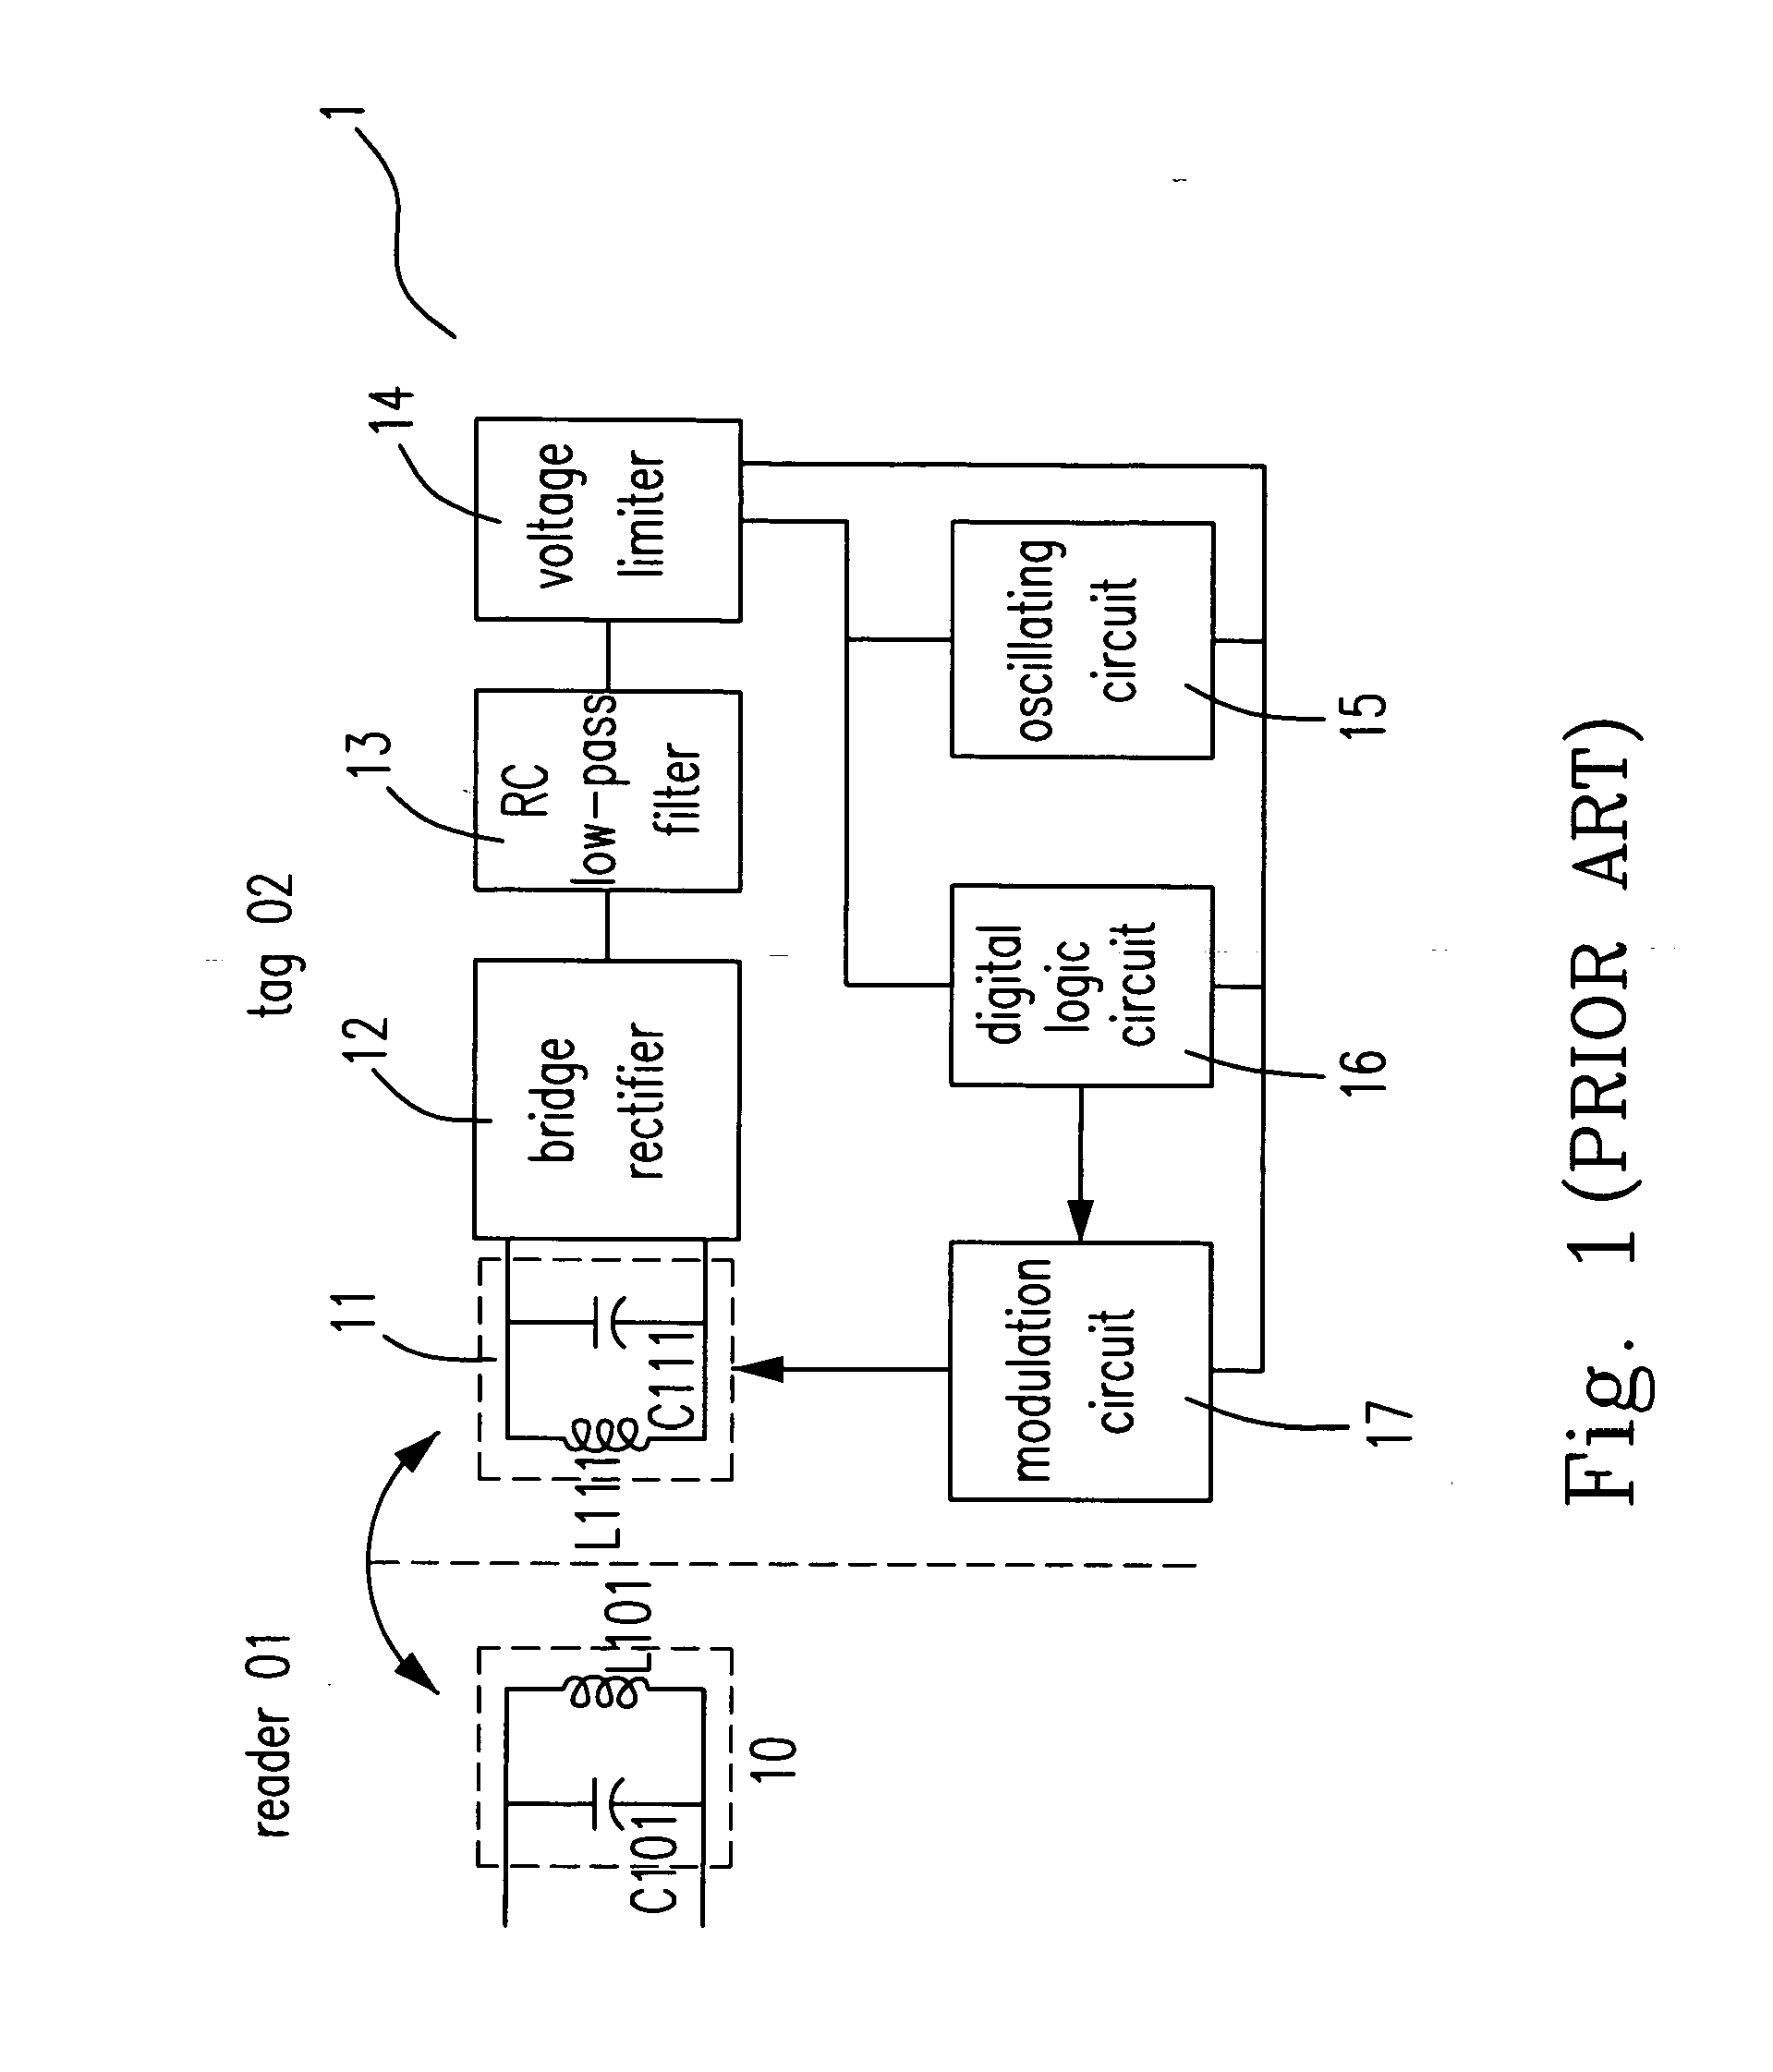 Power processing interface for passive radio frequency identification system